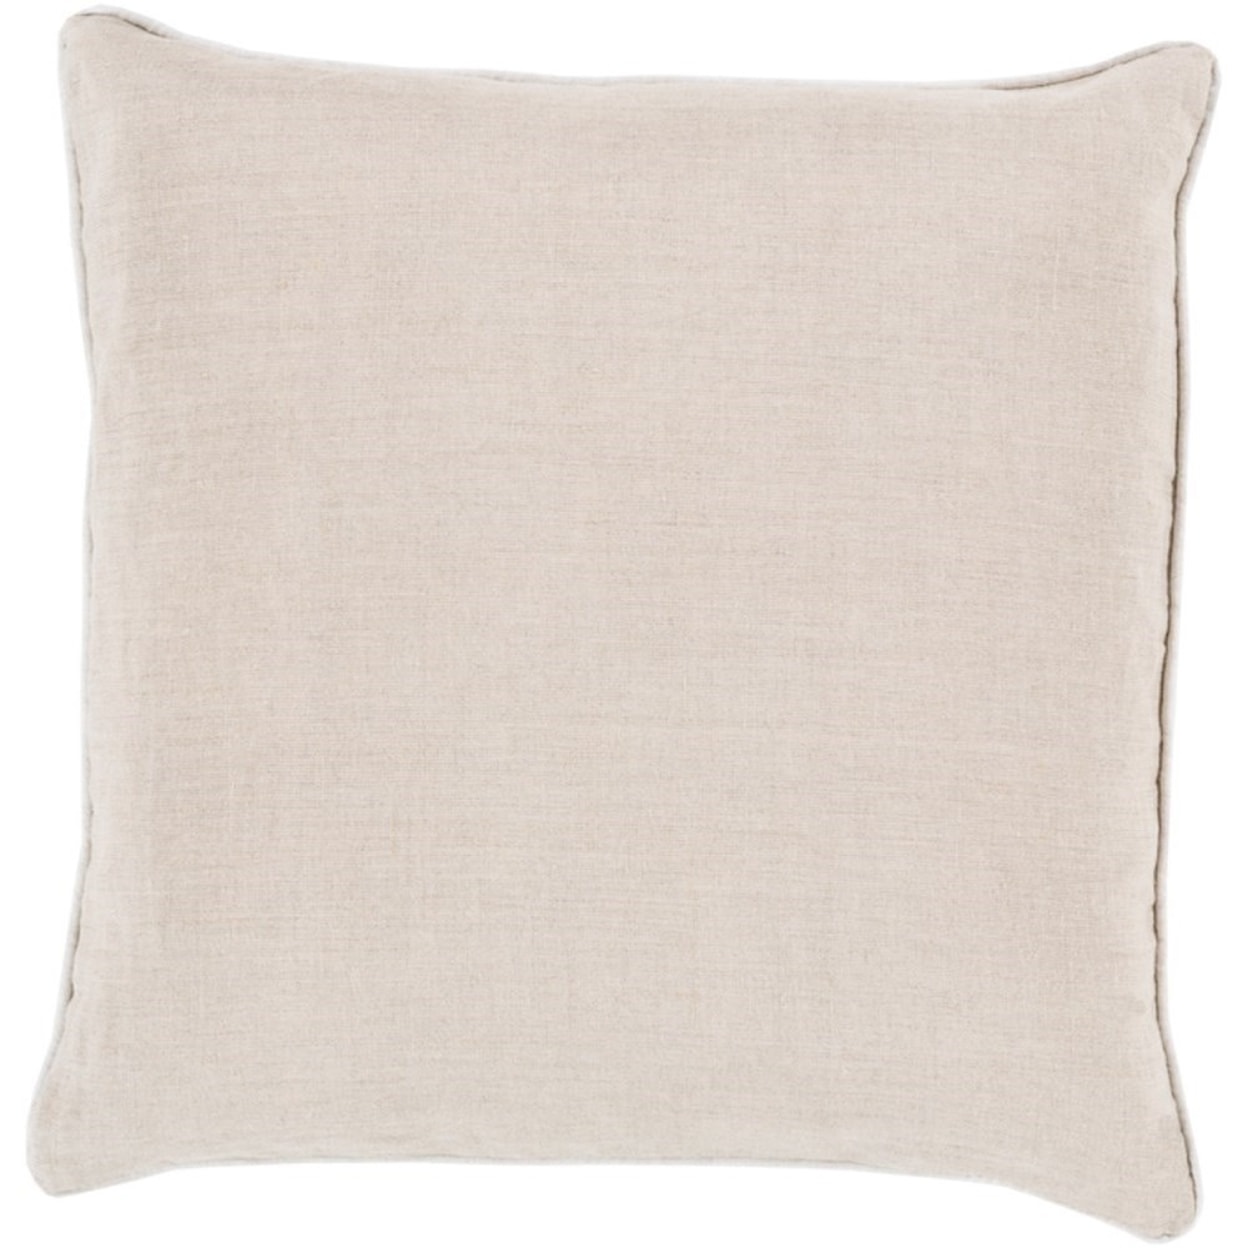 Surya Linen Piped Pillow